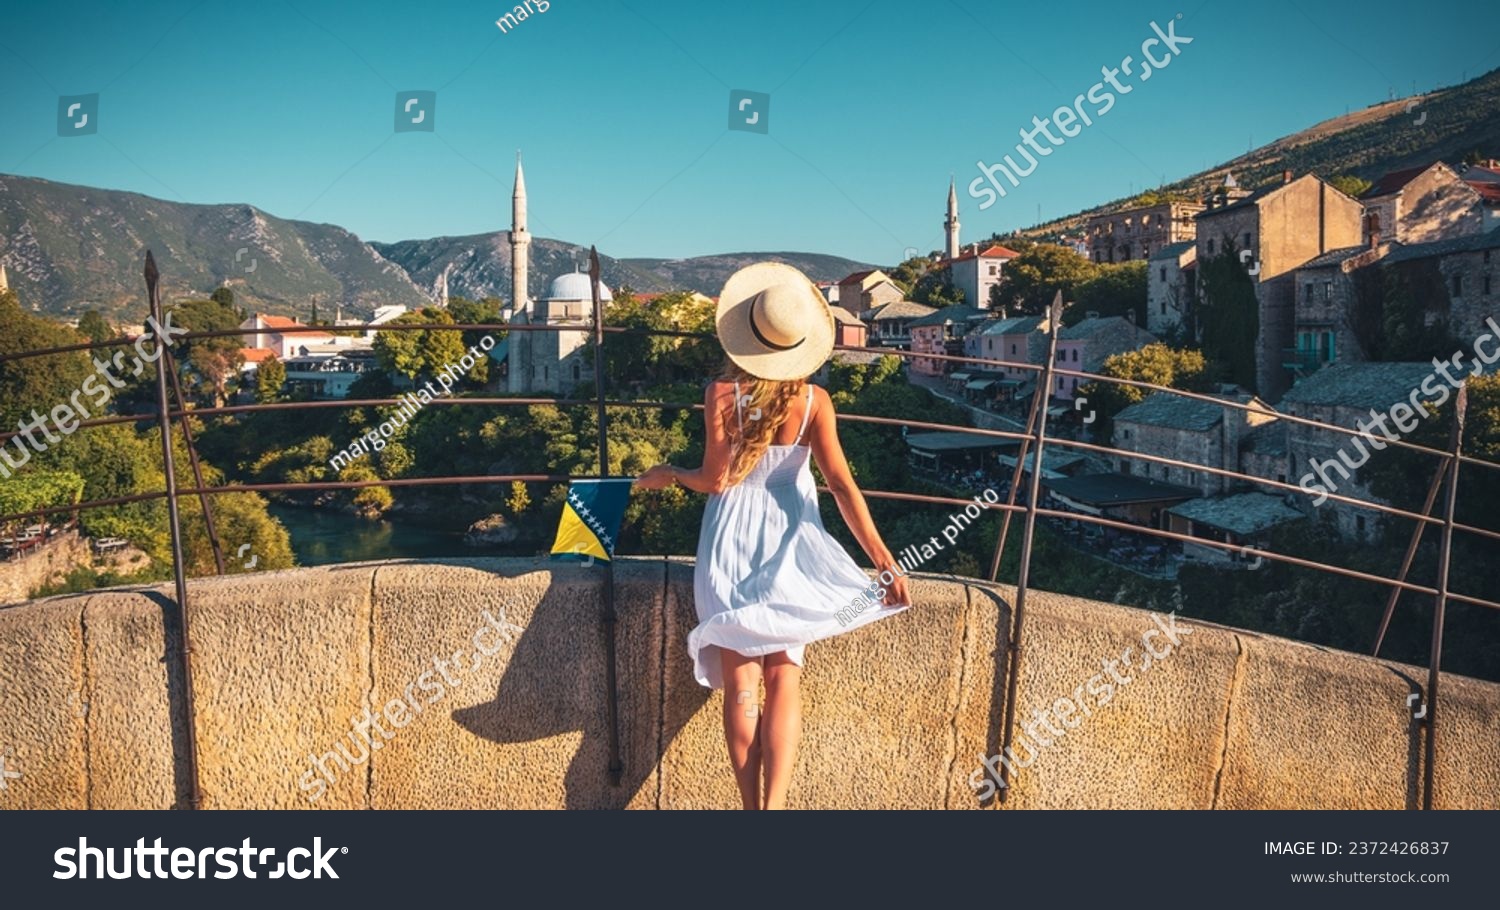 Woman in white dress looking at Old mosque in Town of Mostar- Bosnia Herzegovina #2372426837